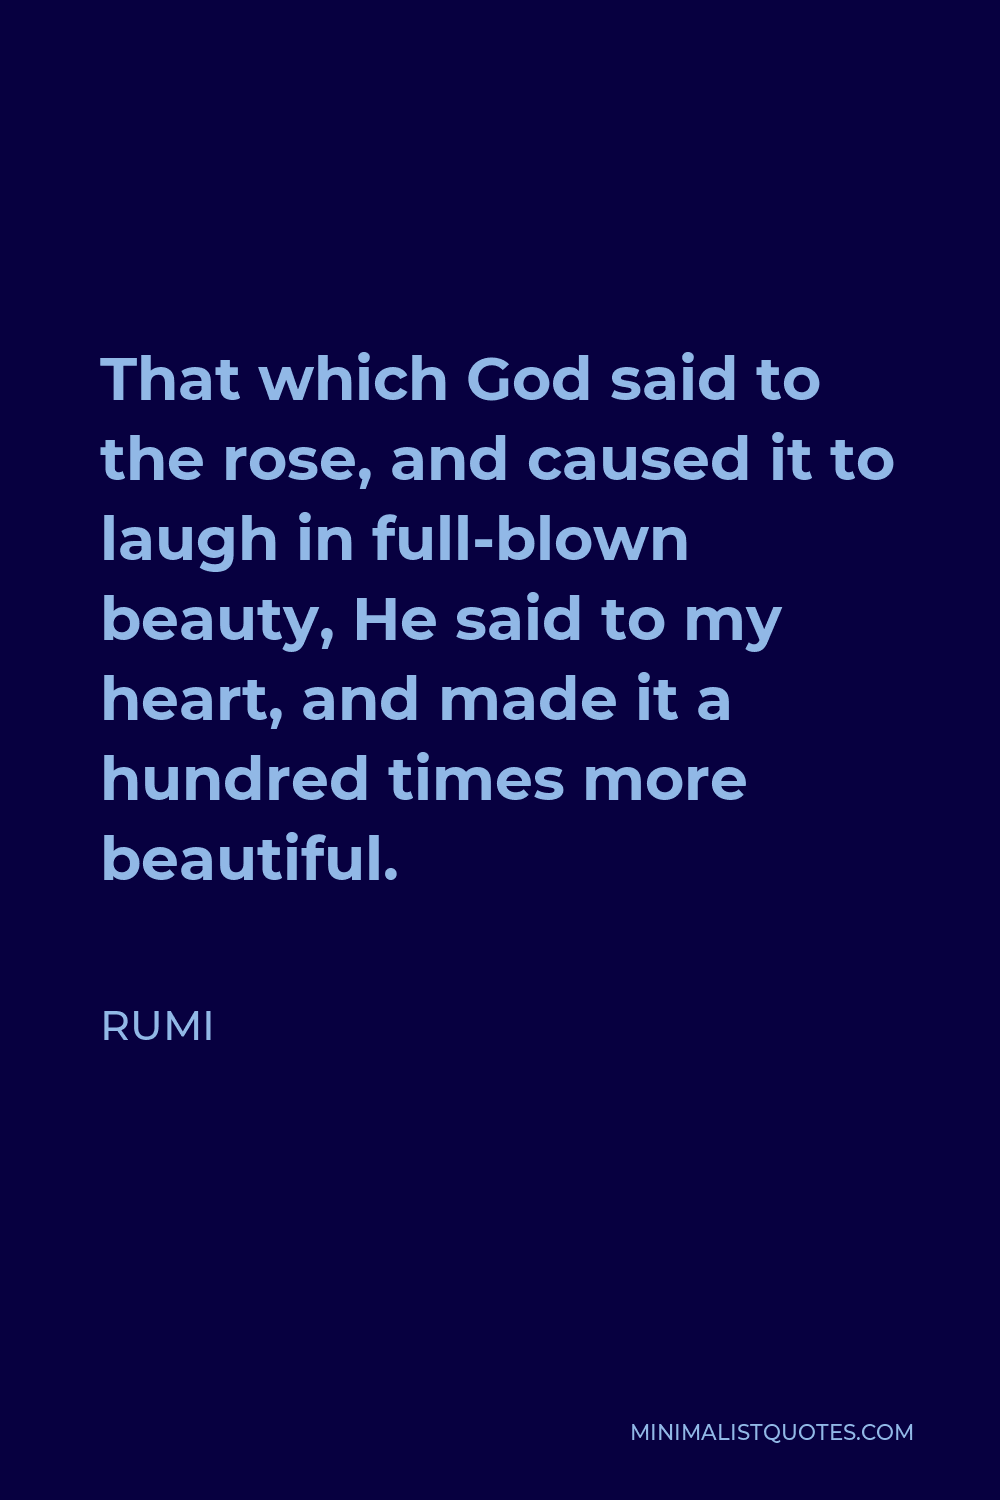 Rumi Quote - That which God said to the rose, and caused it to laugh in full-blown beauty, He said to my heart, and made it a hundred times more beautiful.